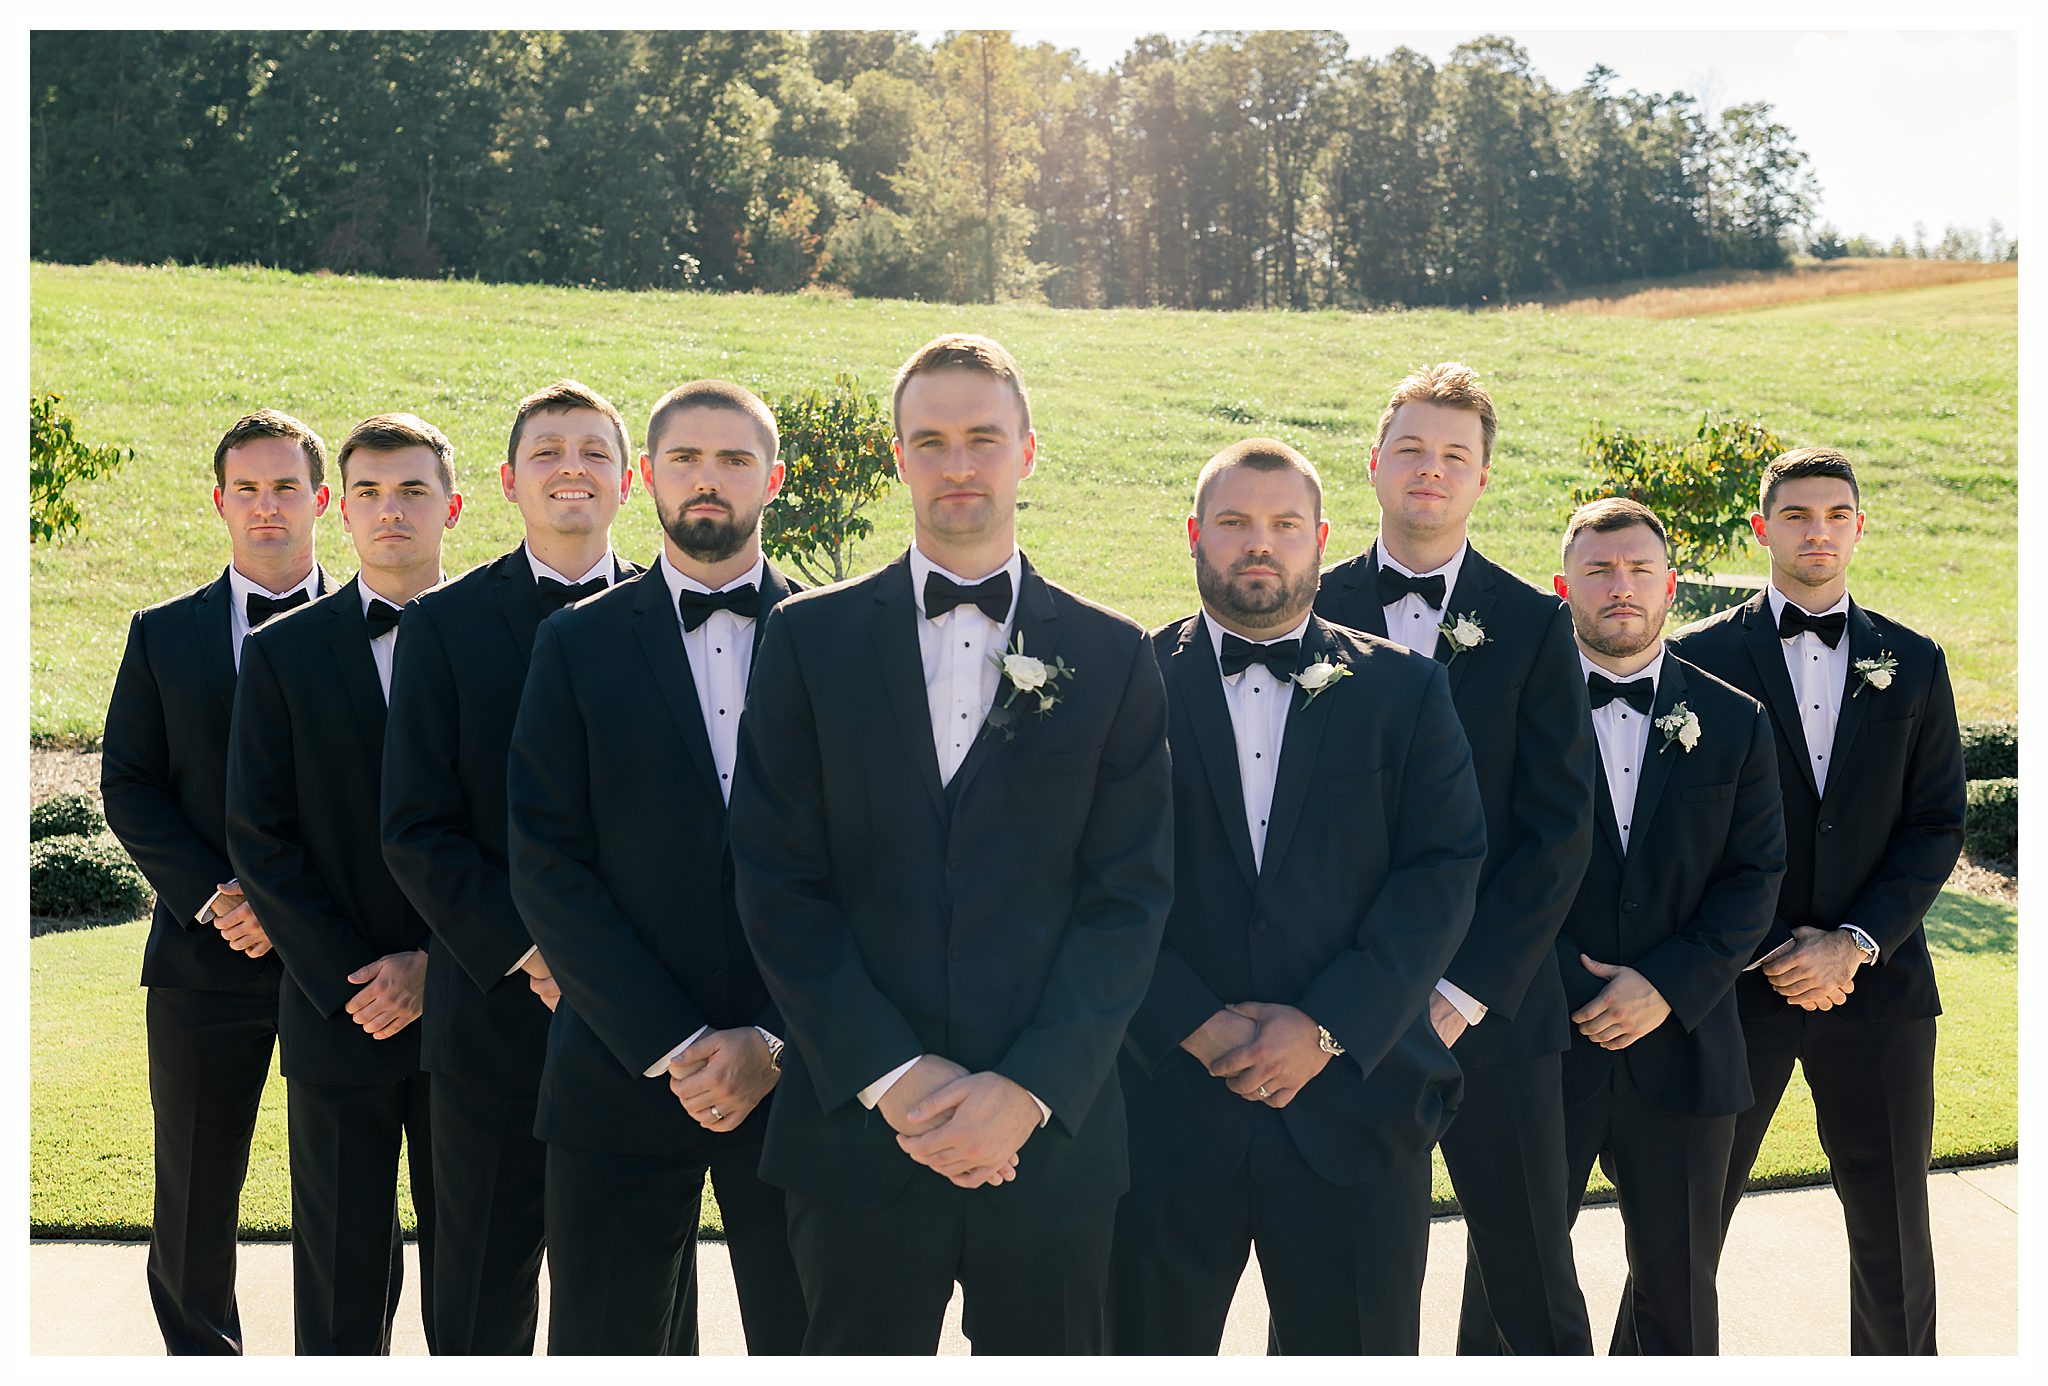 Yonah Mountain Wedding Vineyard Wedding Pictures by the best wedding photographers in cleveland ga georgia